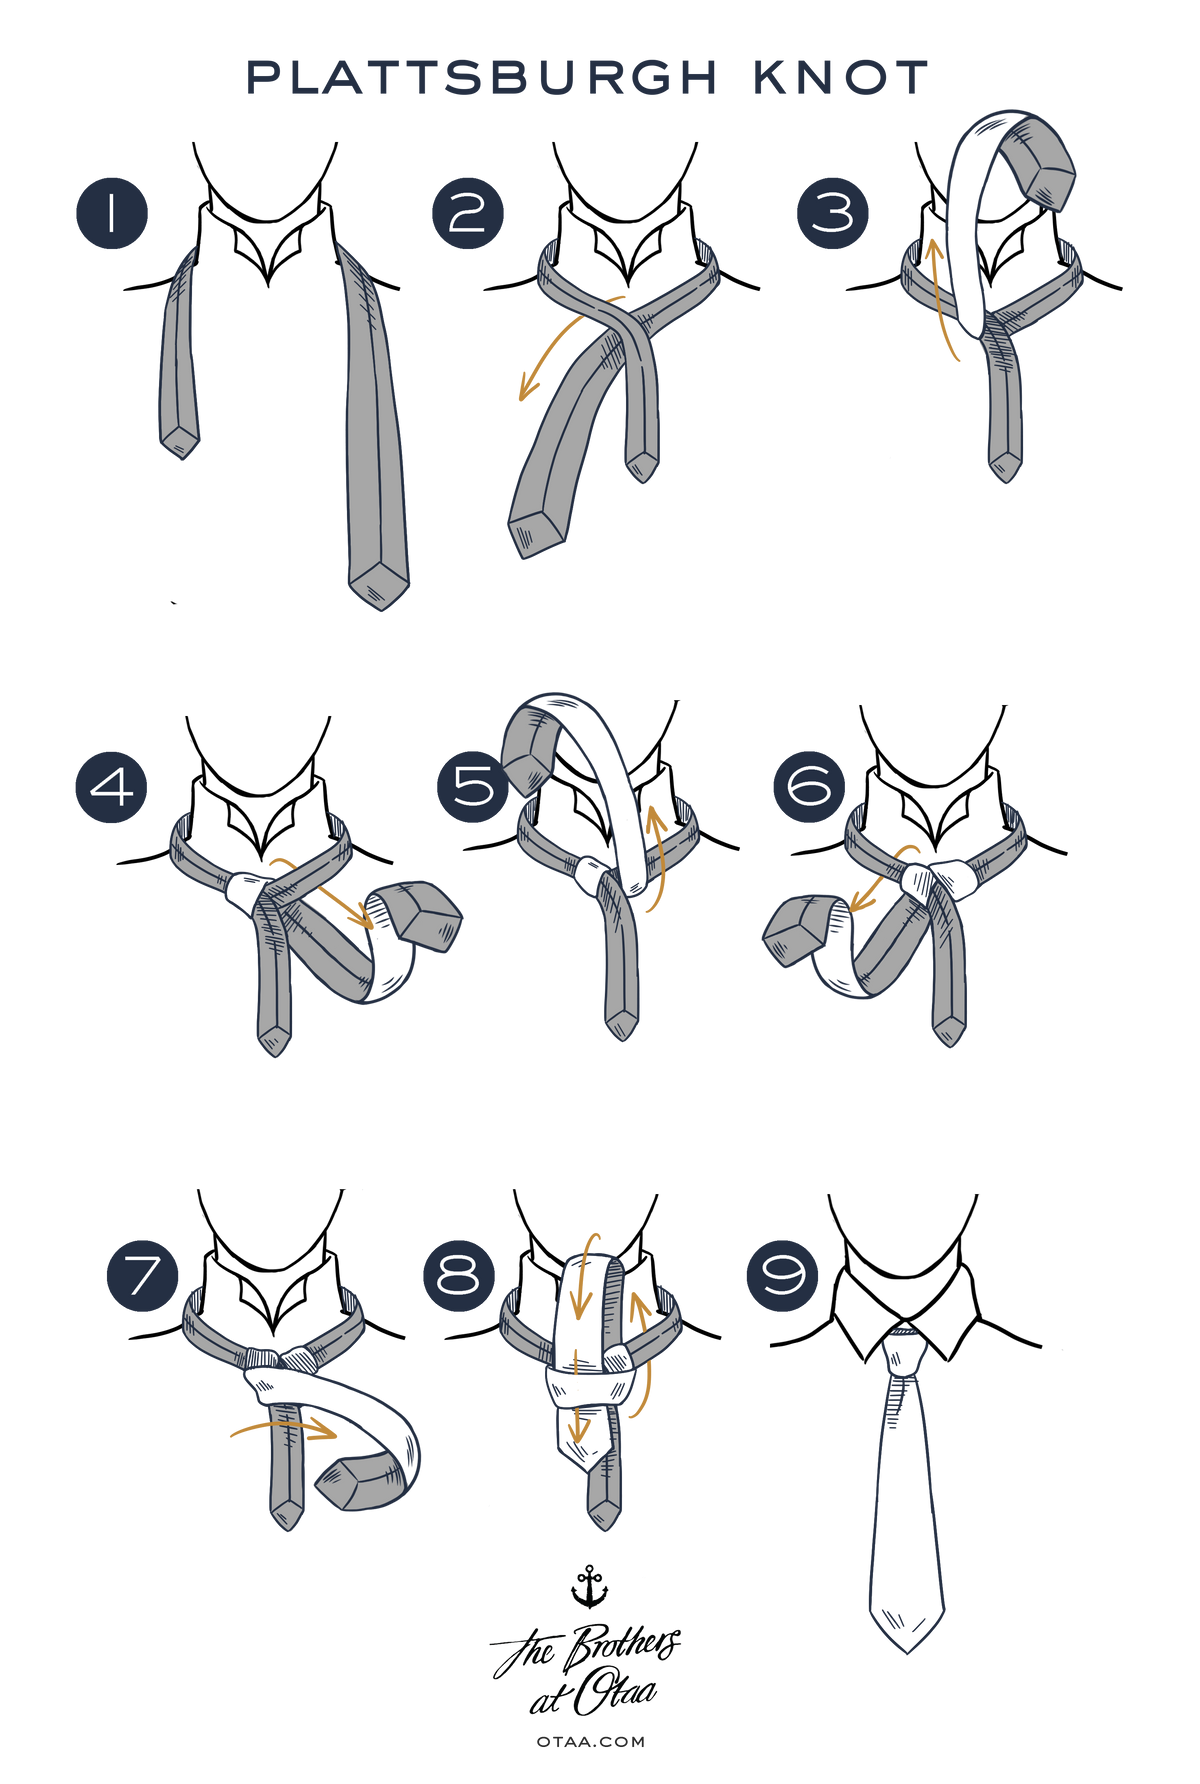 How to tie a plattsburgh knot - steps